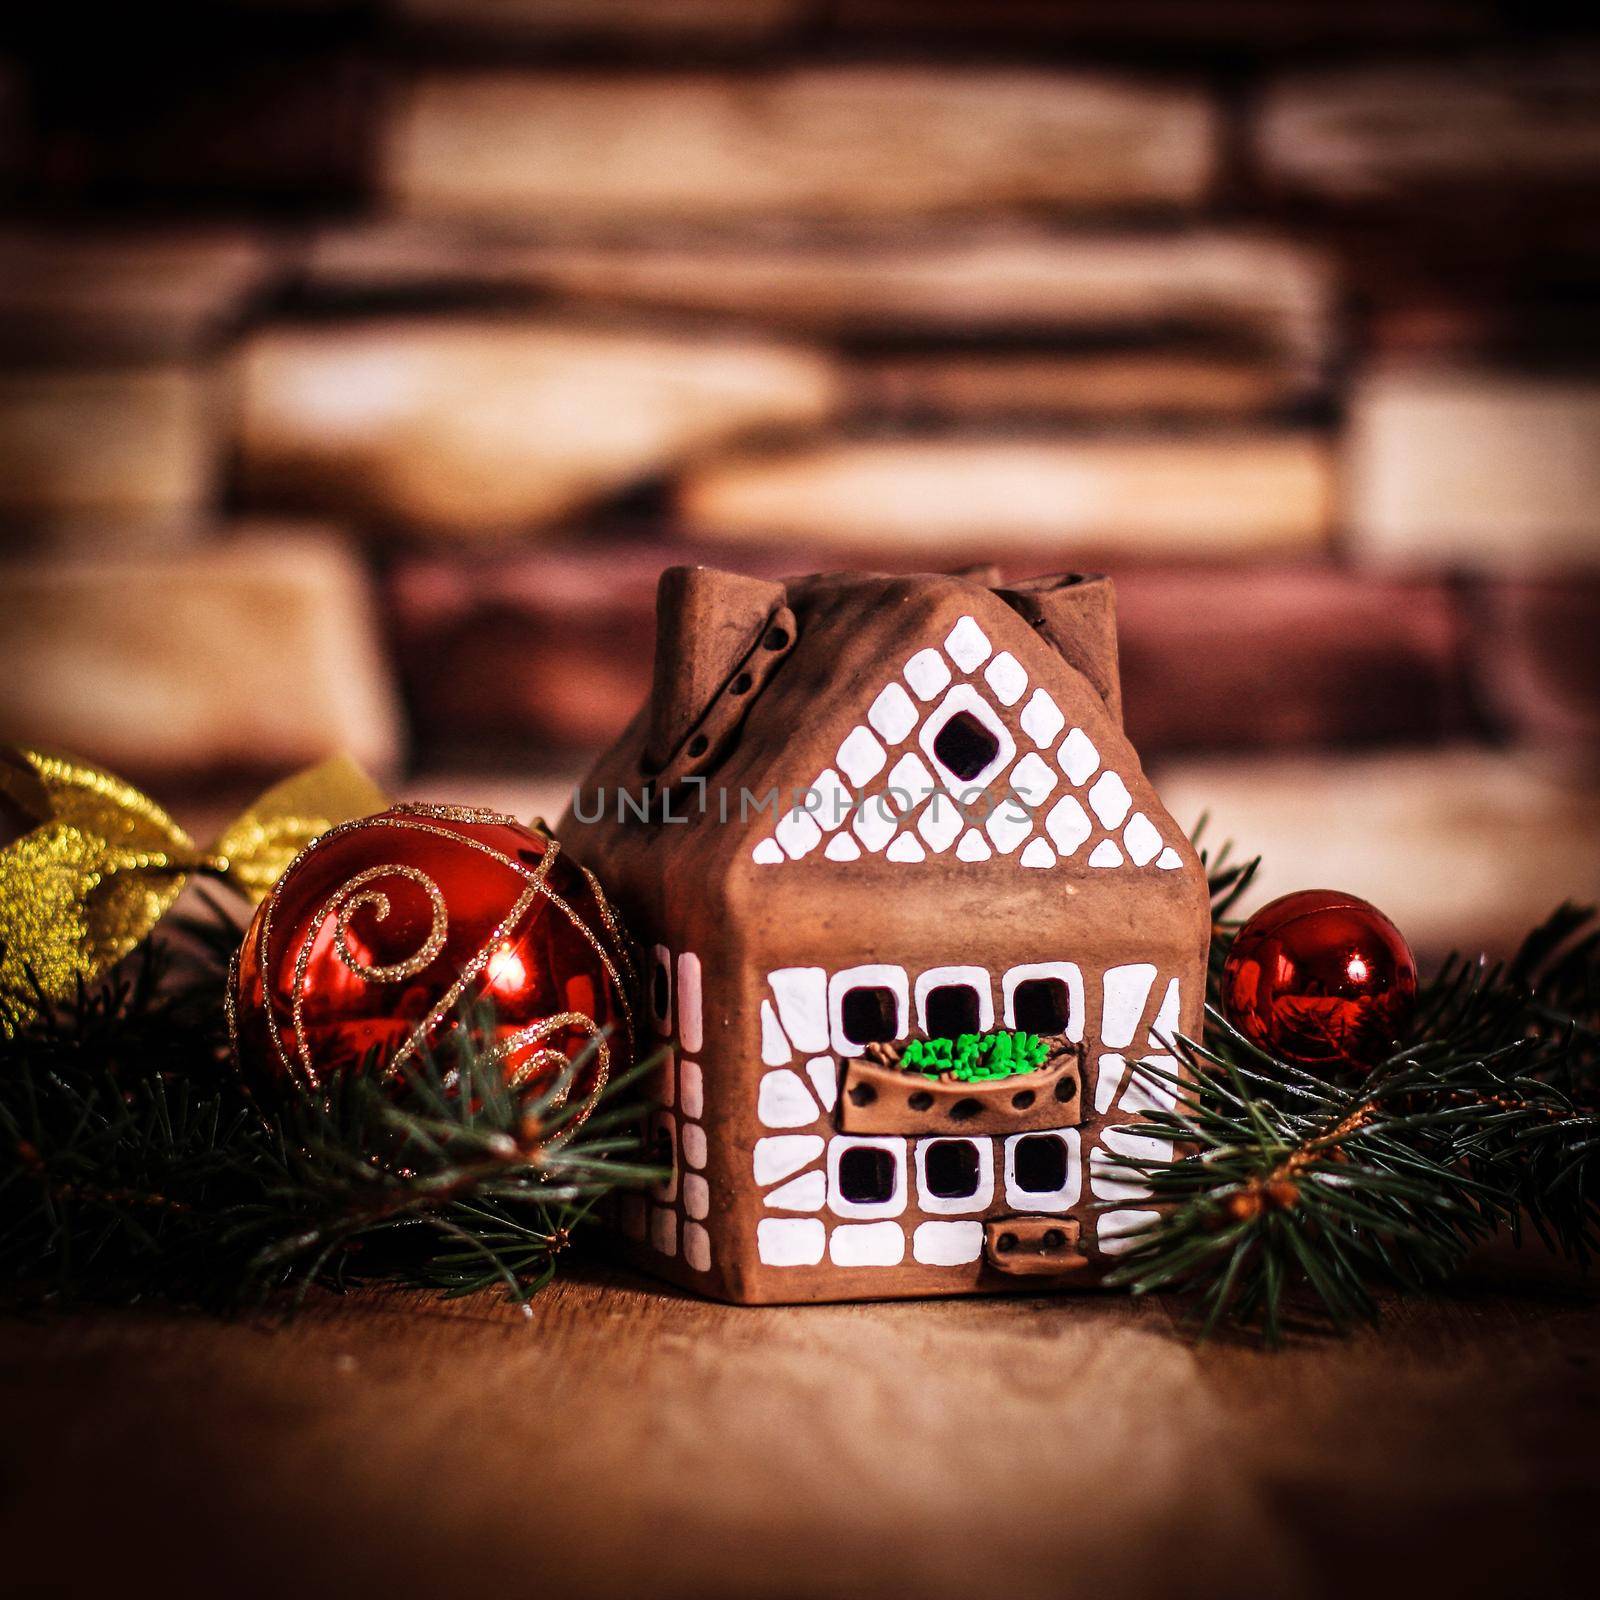 gingerbread house,Christmas balls. the concept of the celebration.photo with copy space